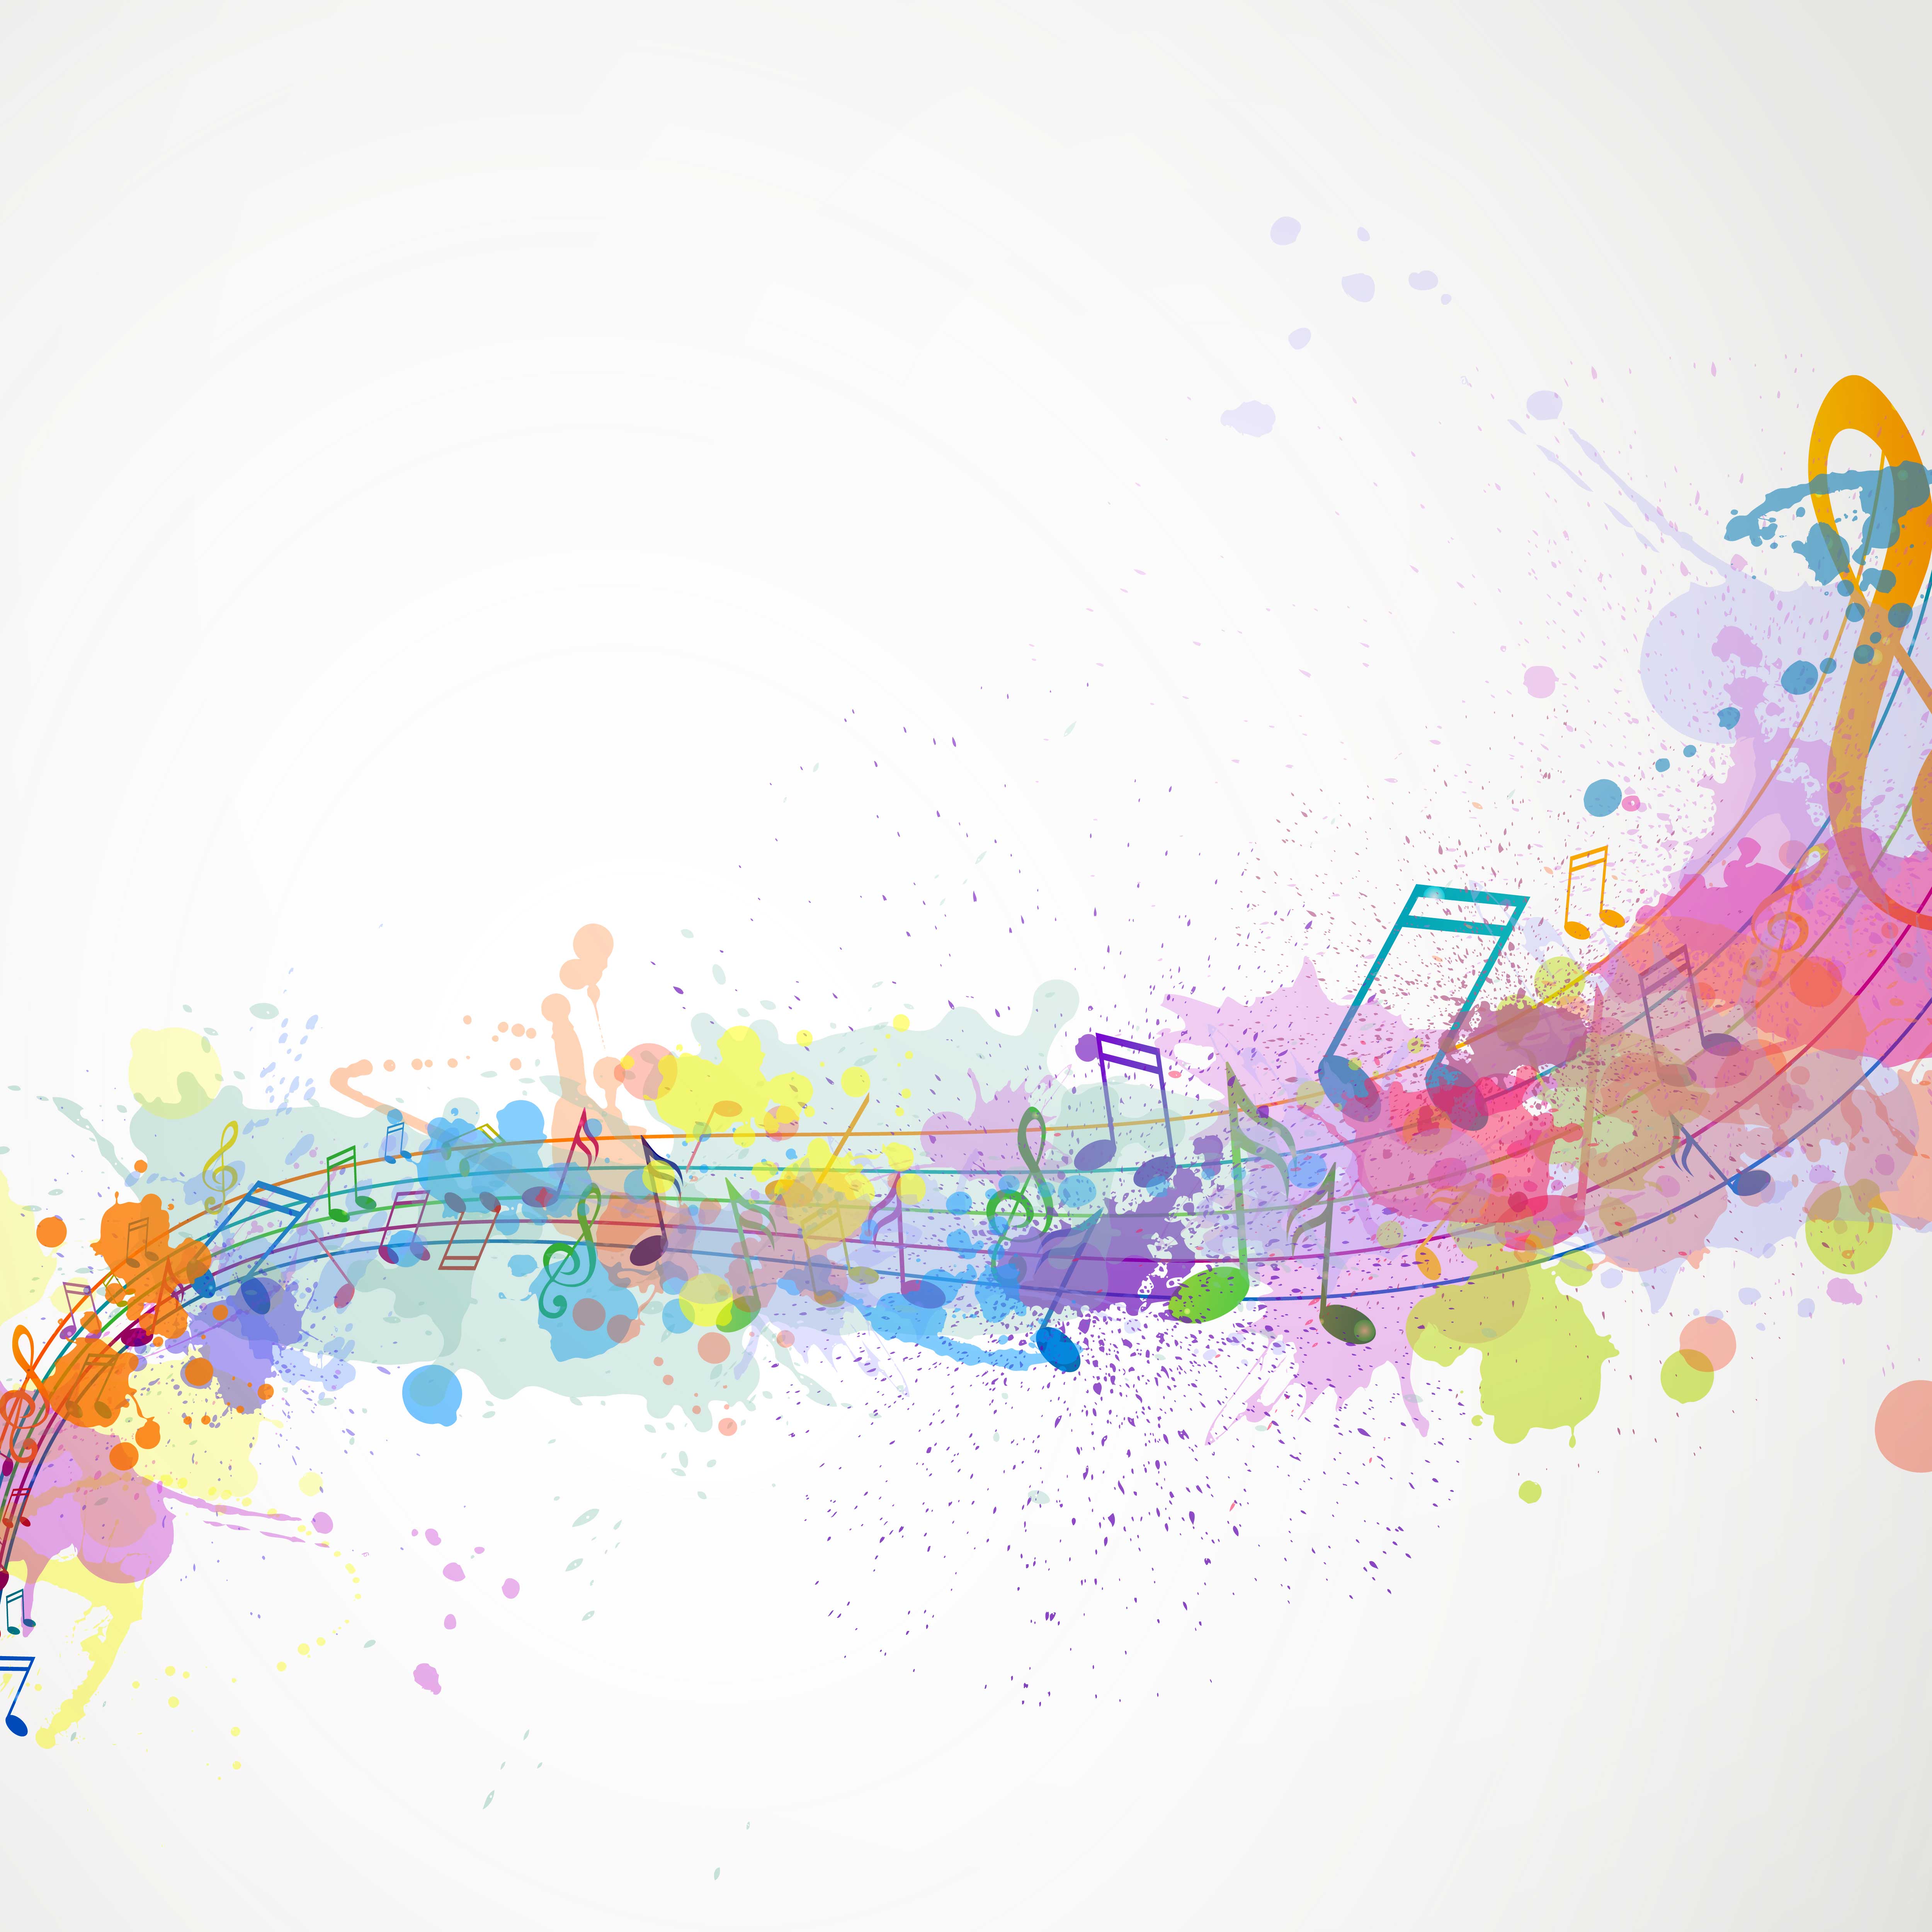 Vector illustration of an abstract background with music notes